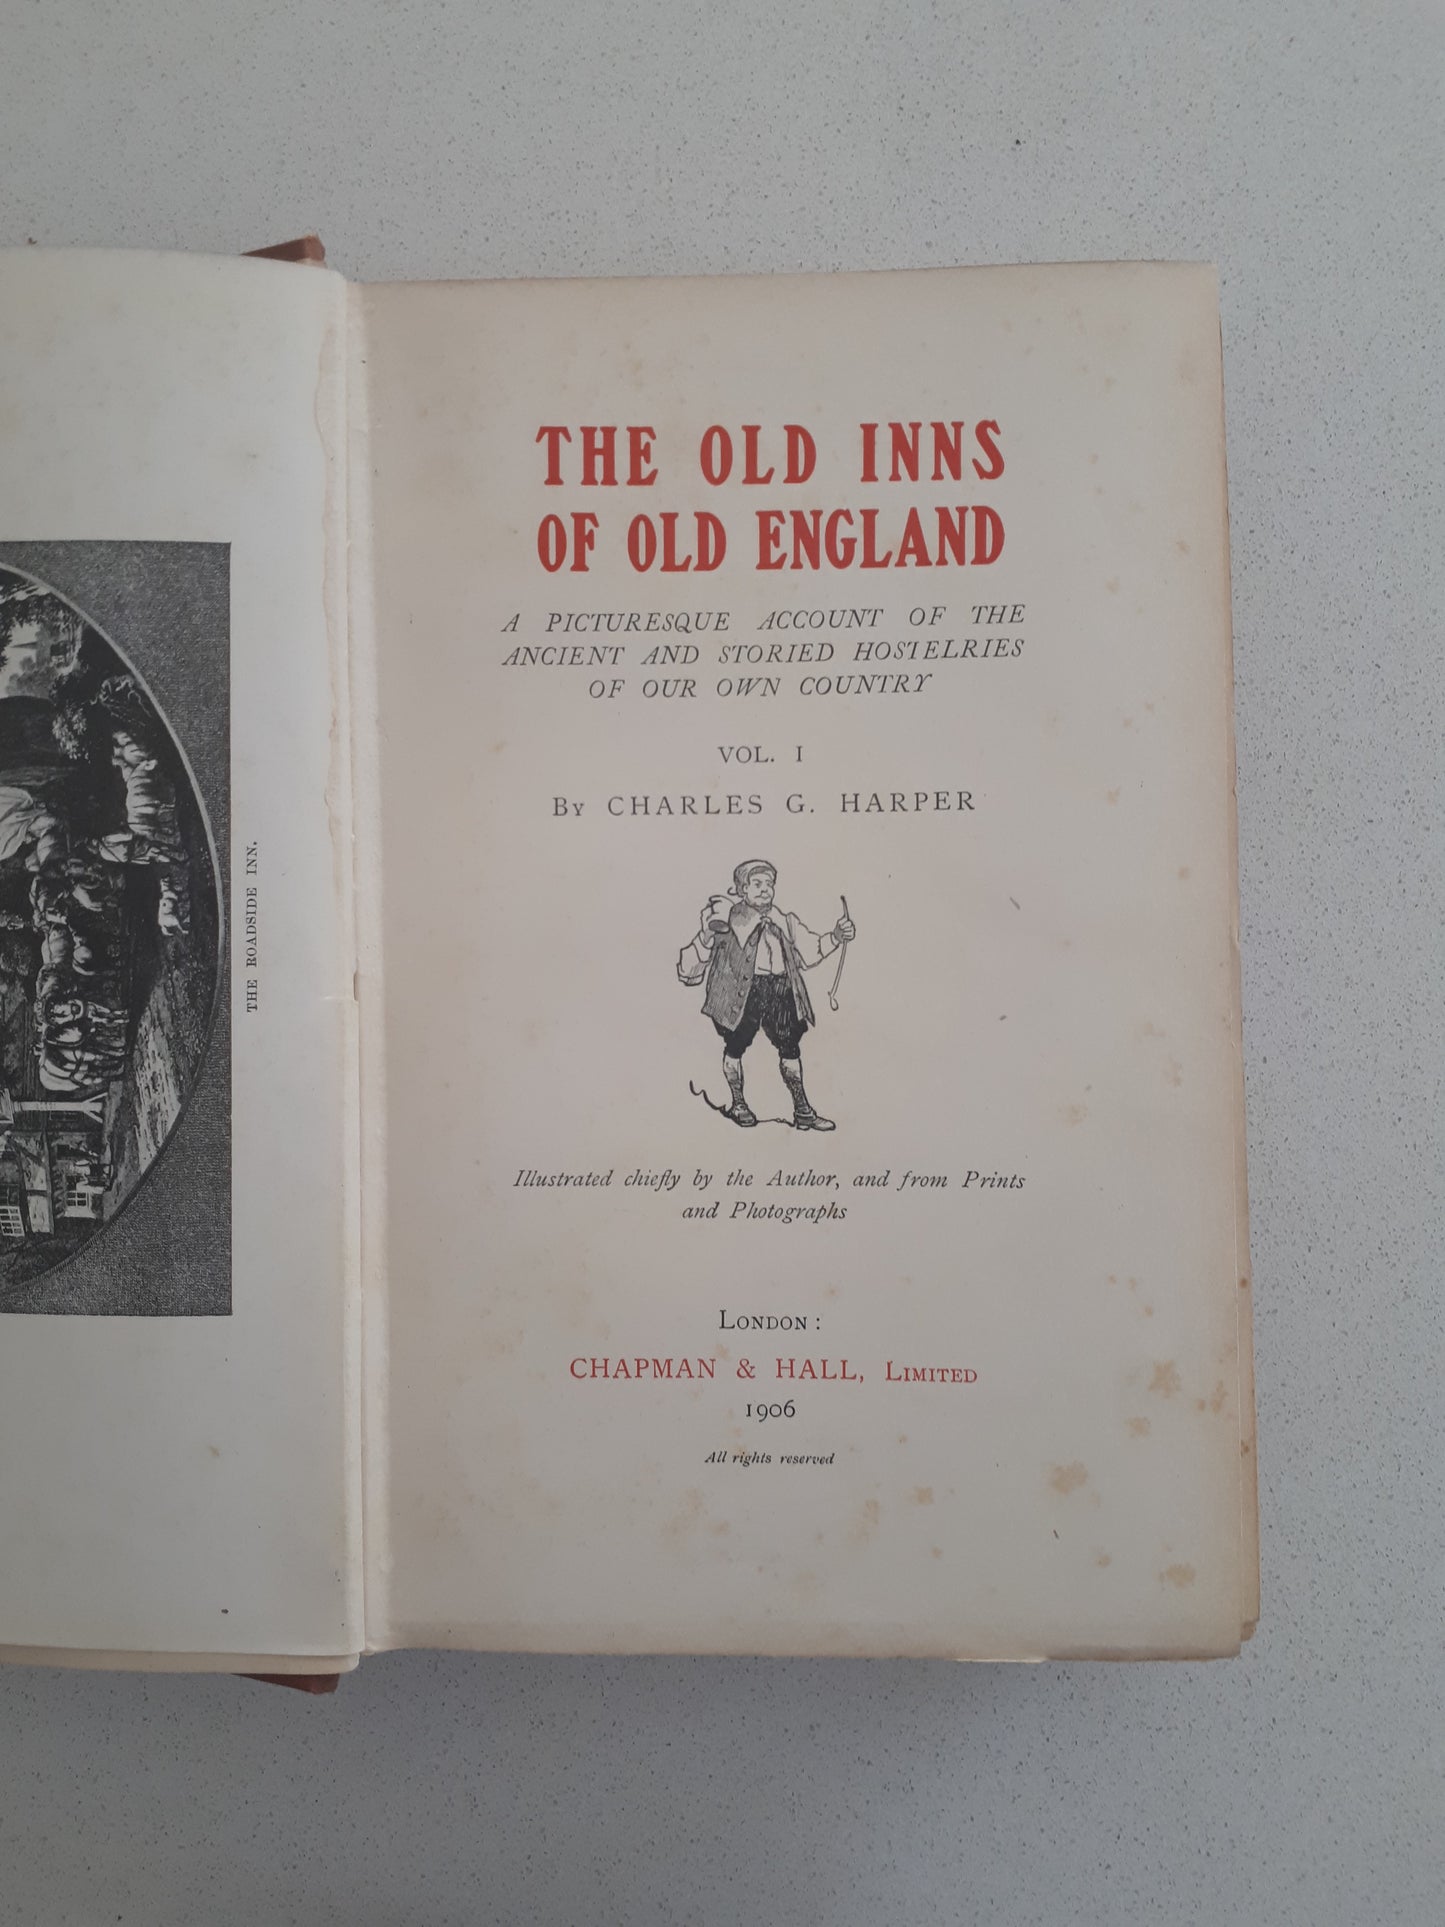 The Old Inns Of Old England - Vol I by Charles G, Harper